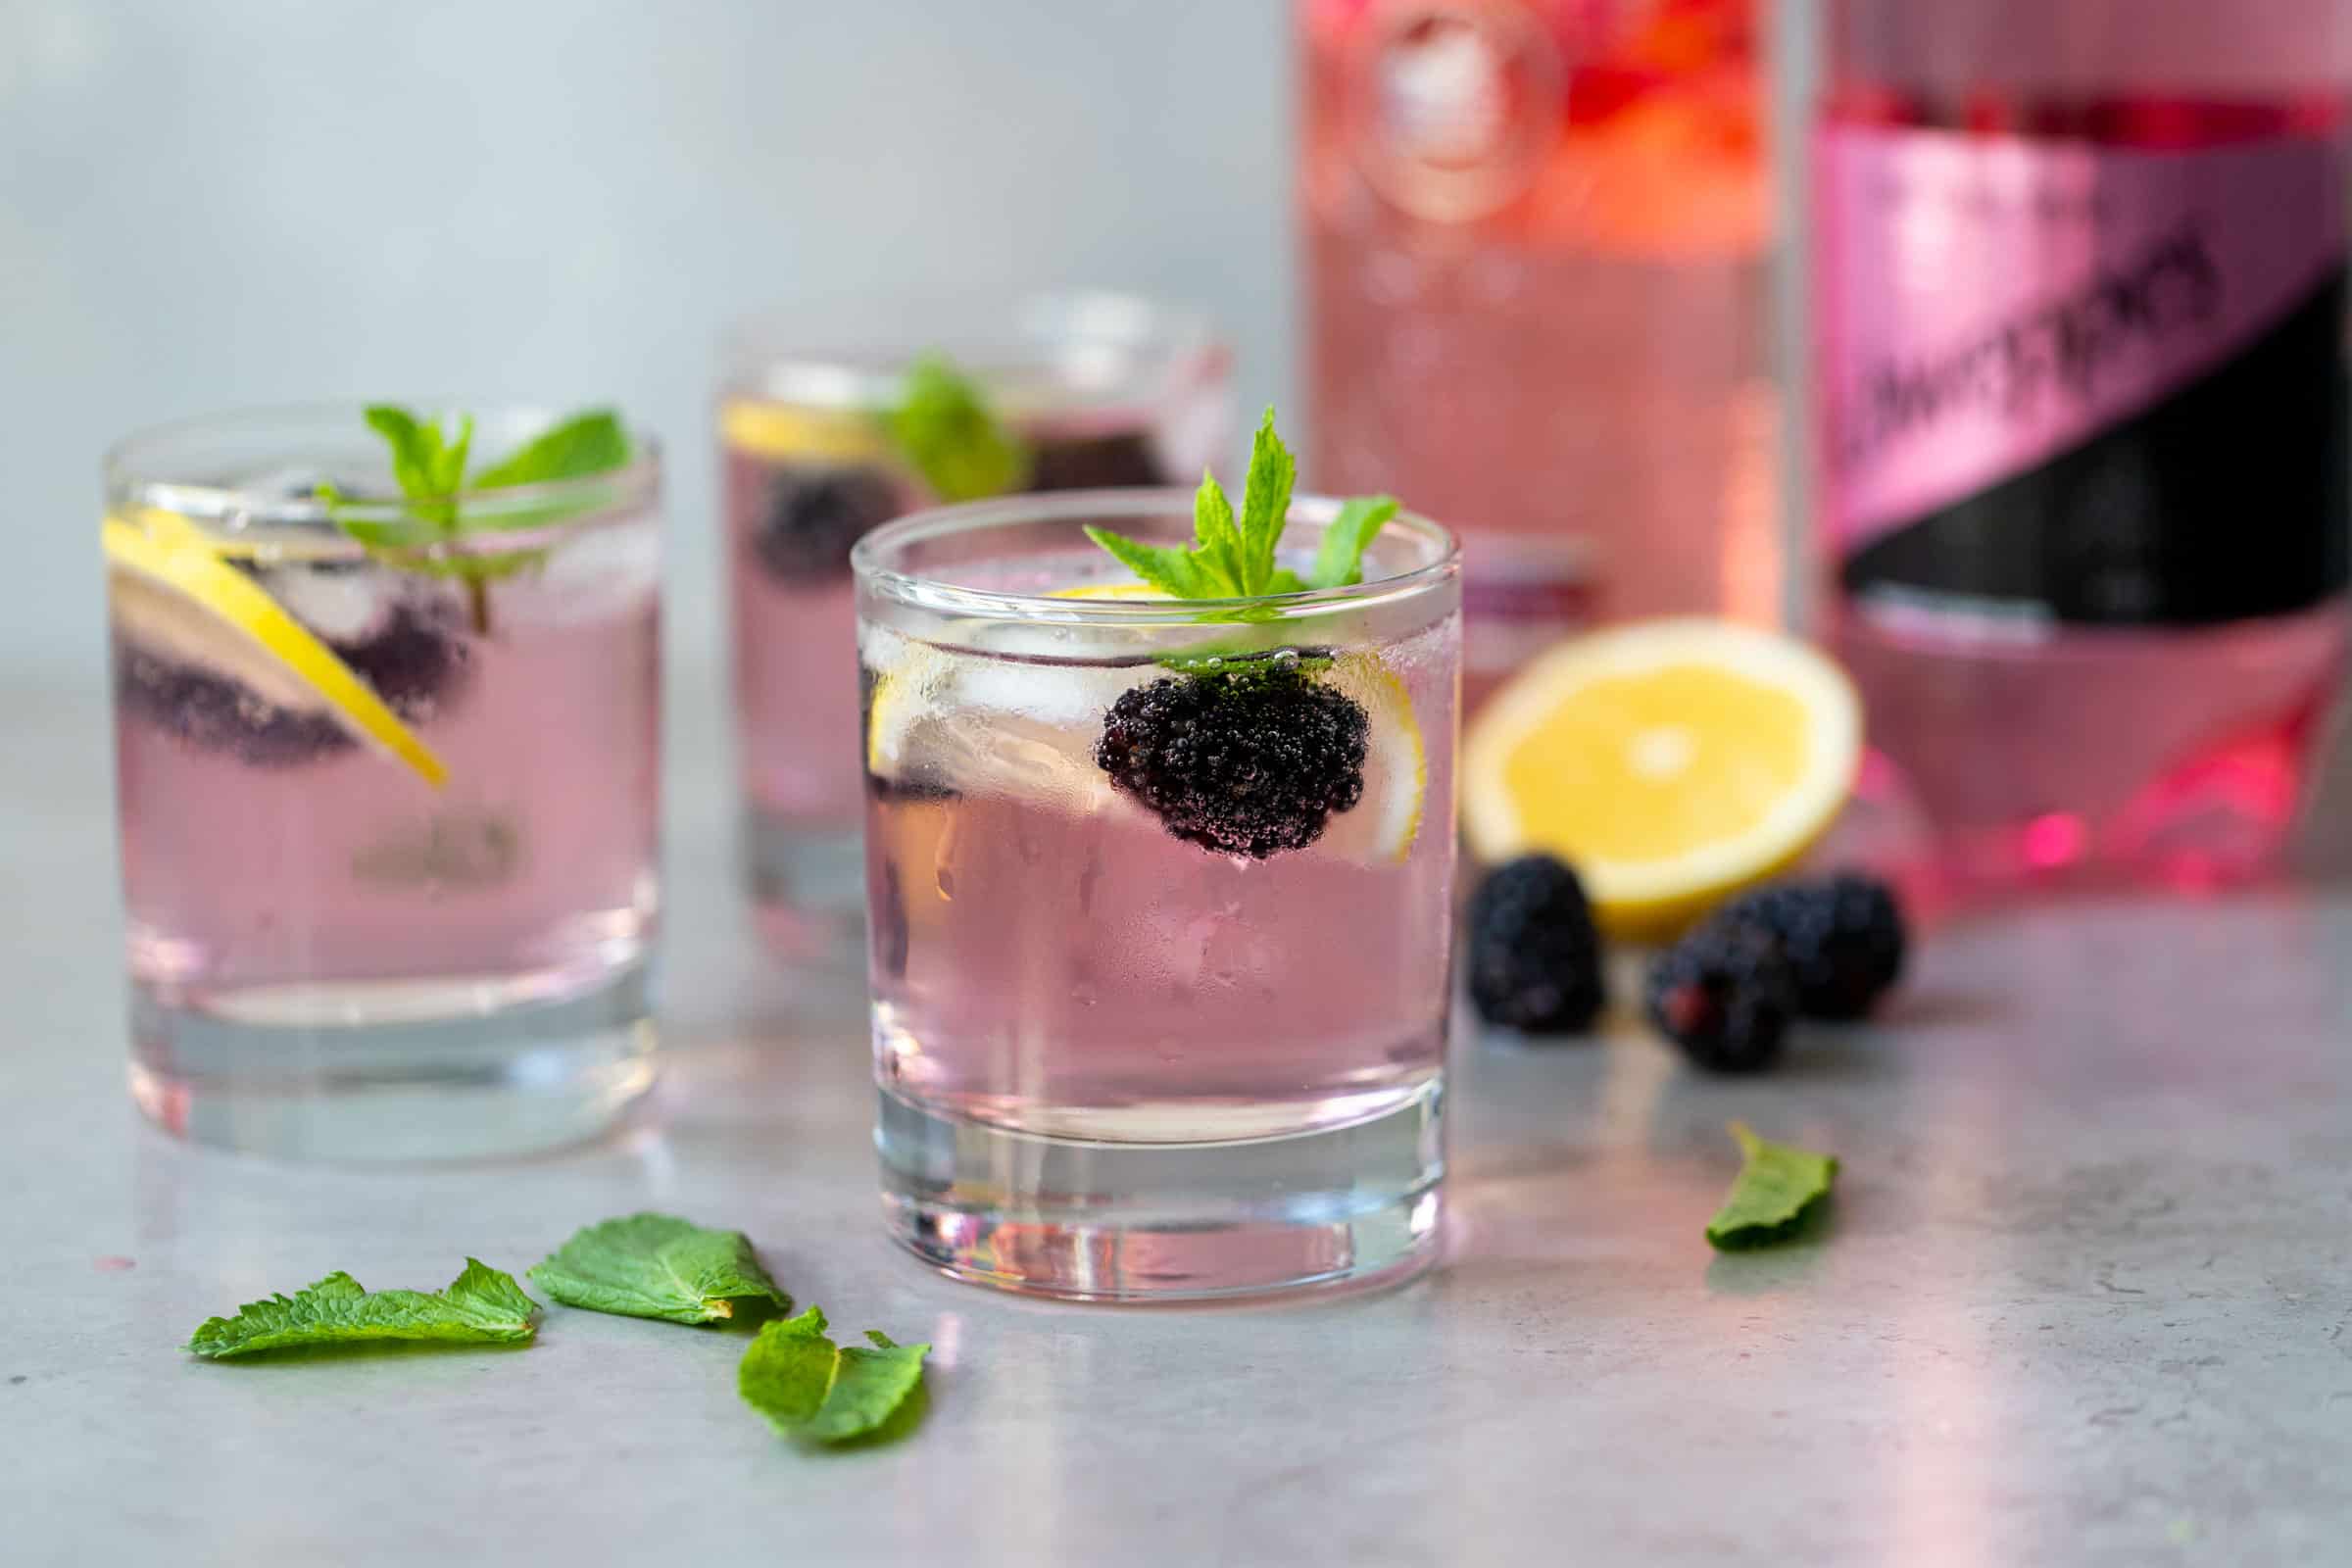 Cocktail Gin Tonic